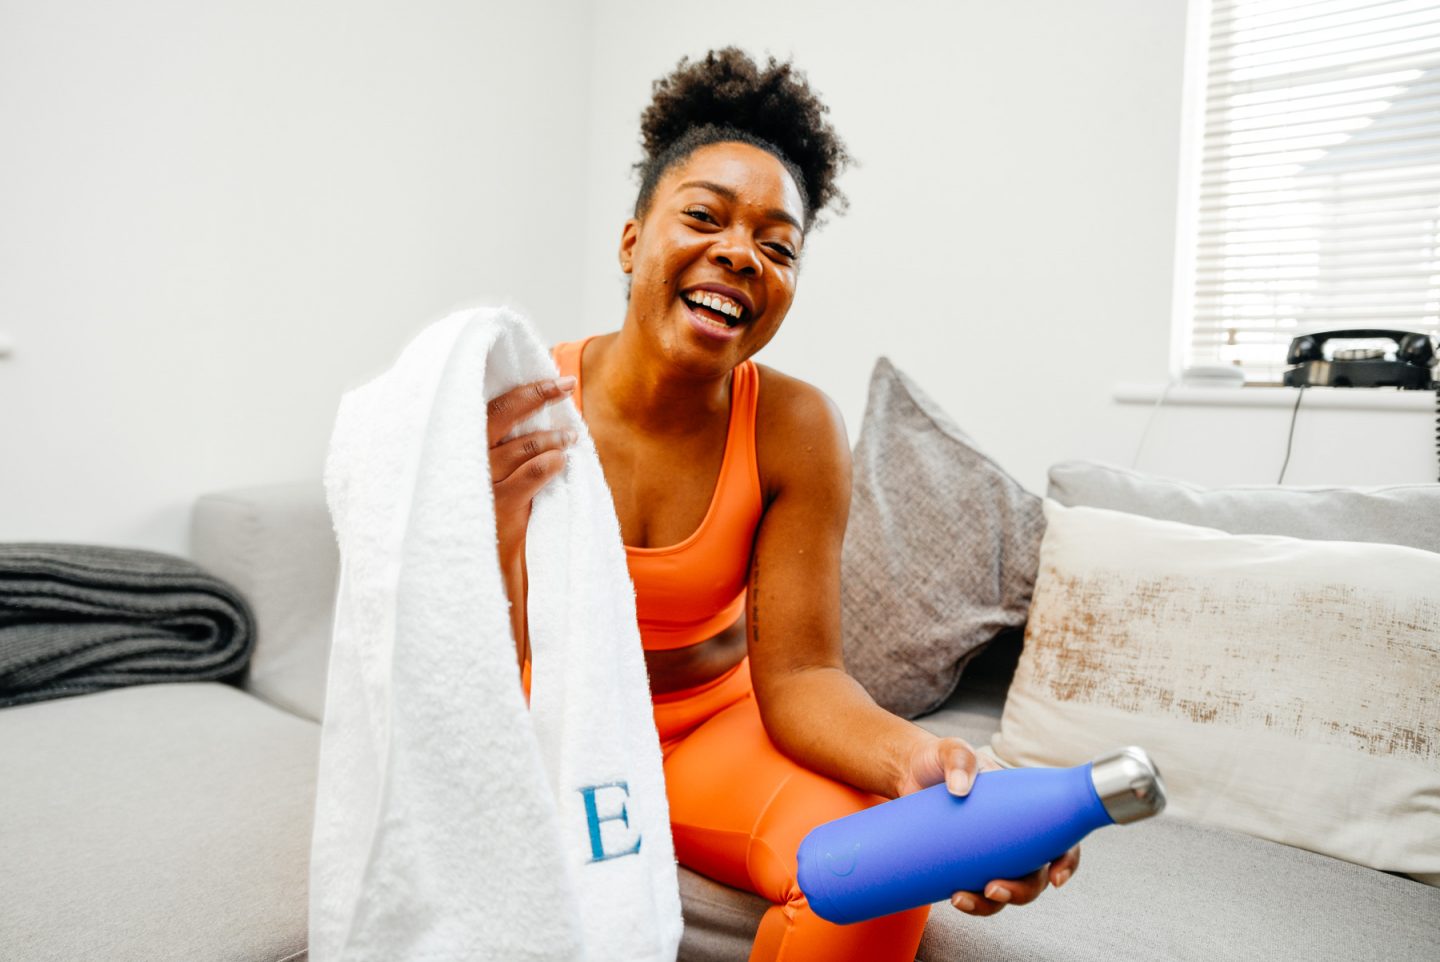 Elle is seated on sofa with white towel and blue water bottle, smiling. Adding Wellbeing Moments To Your Day with Very